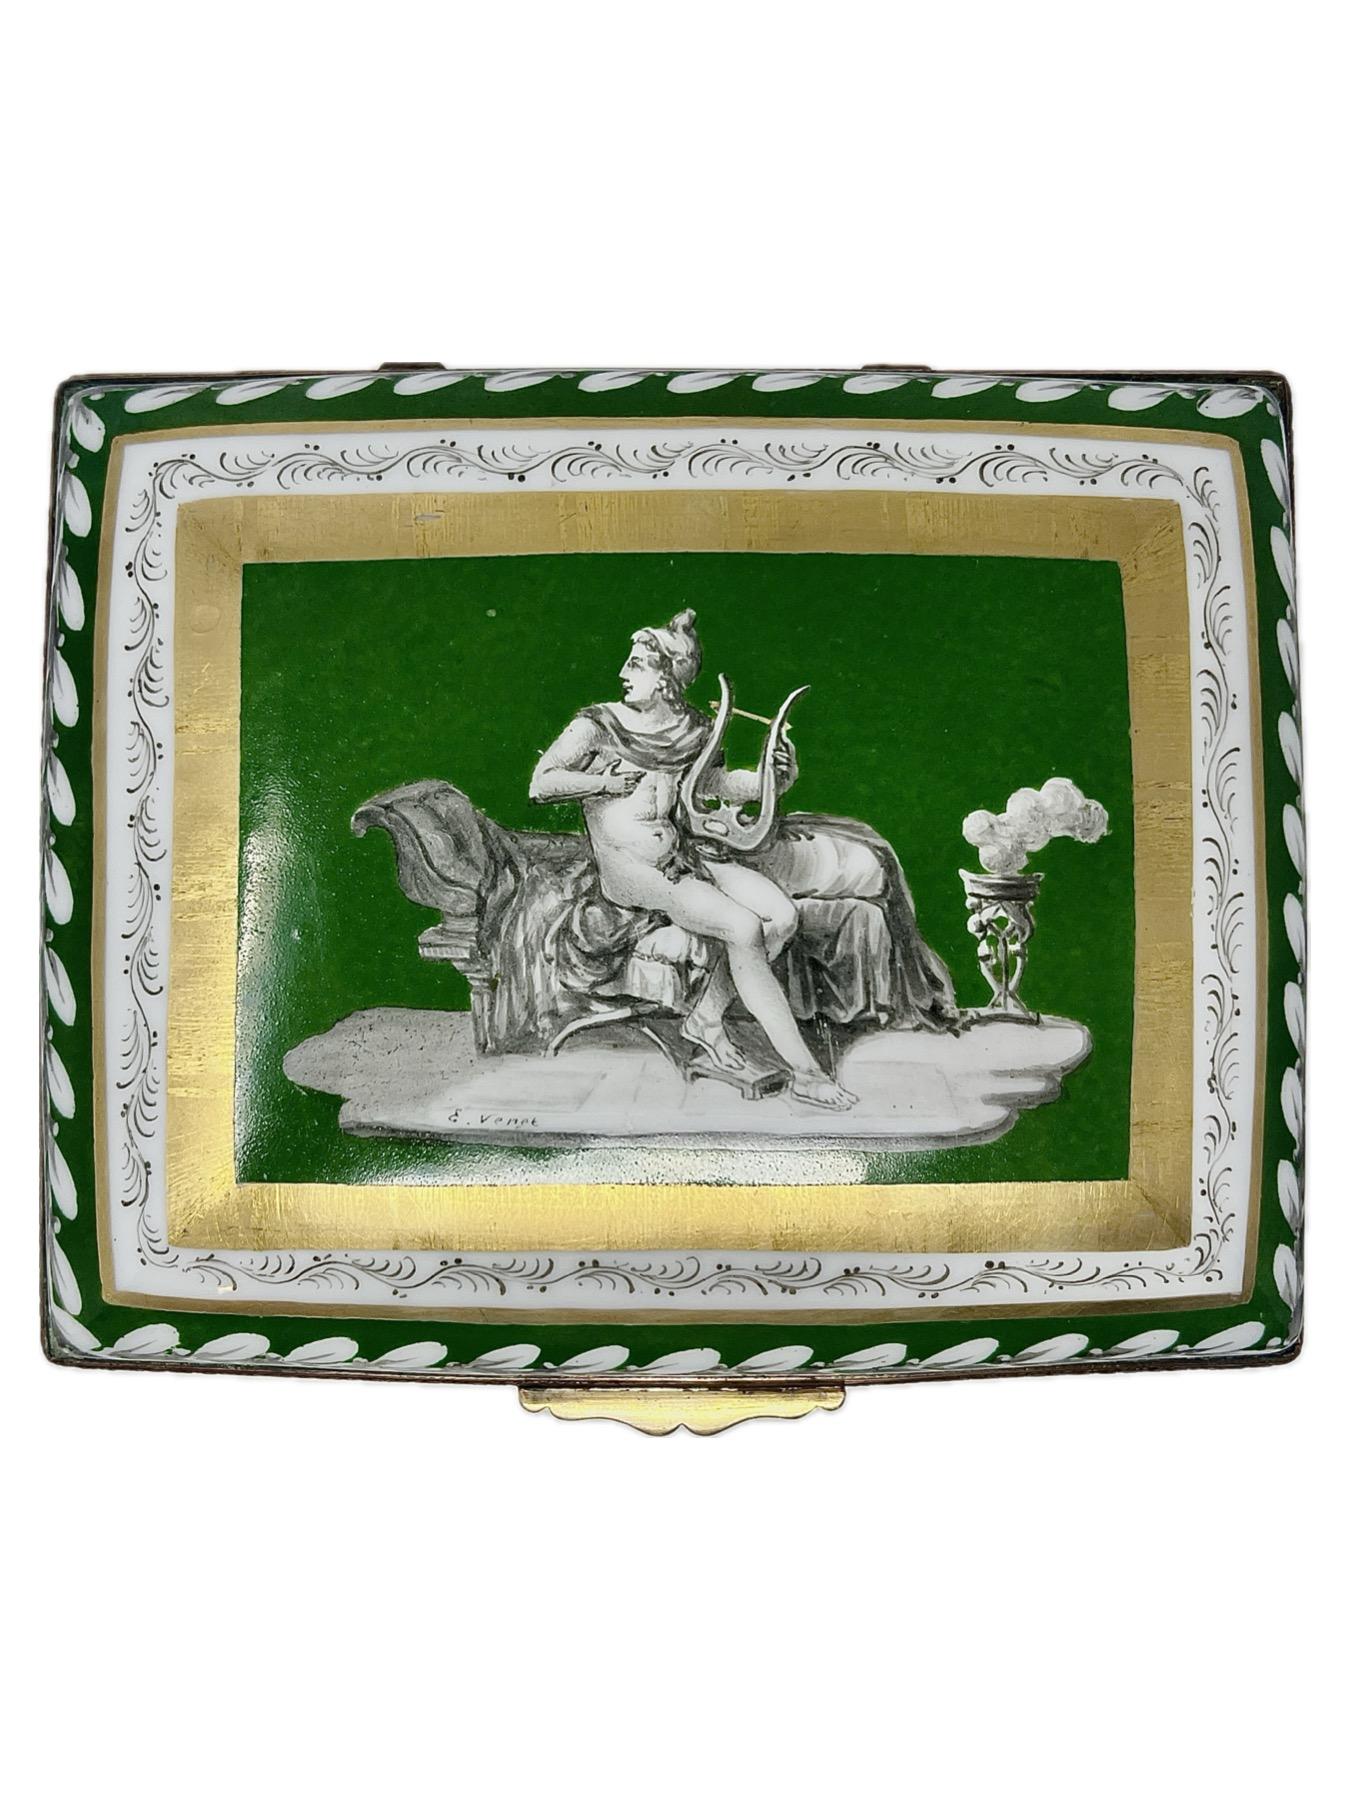 Antique French Gold Bronze Mounted Green & White Porcelain Jewel Box, Circa 1900.